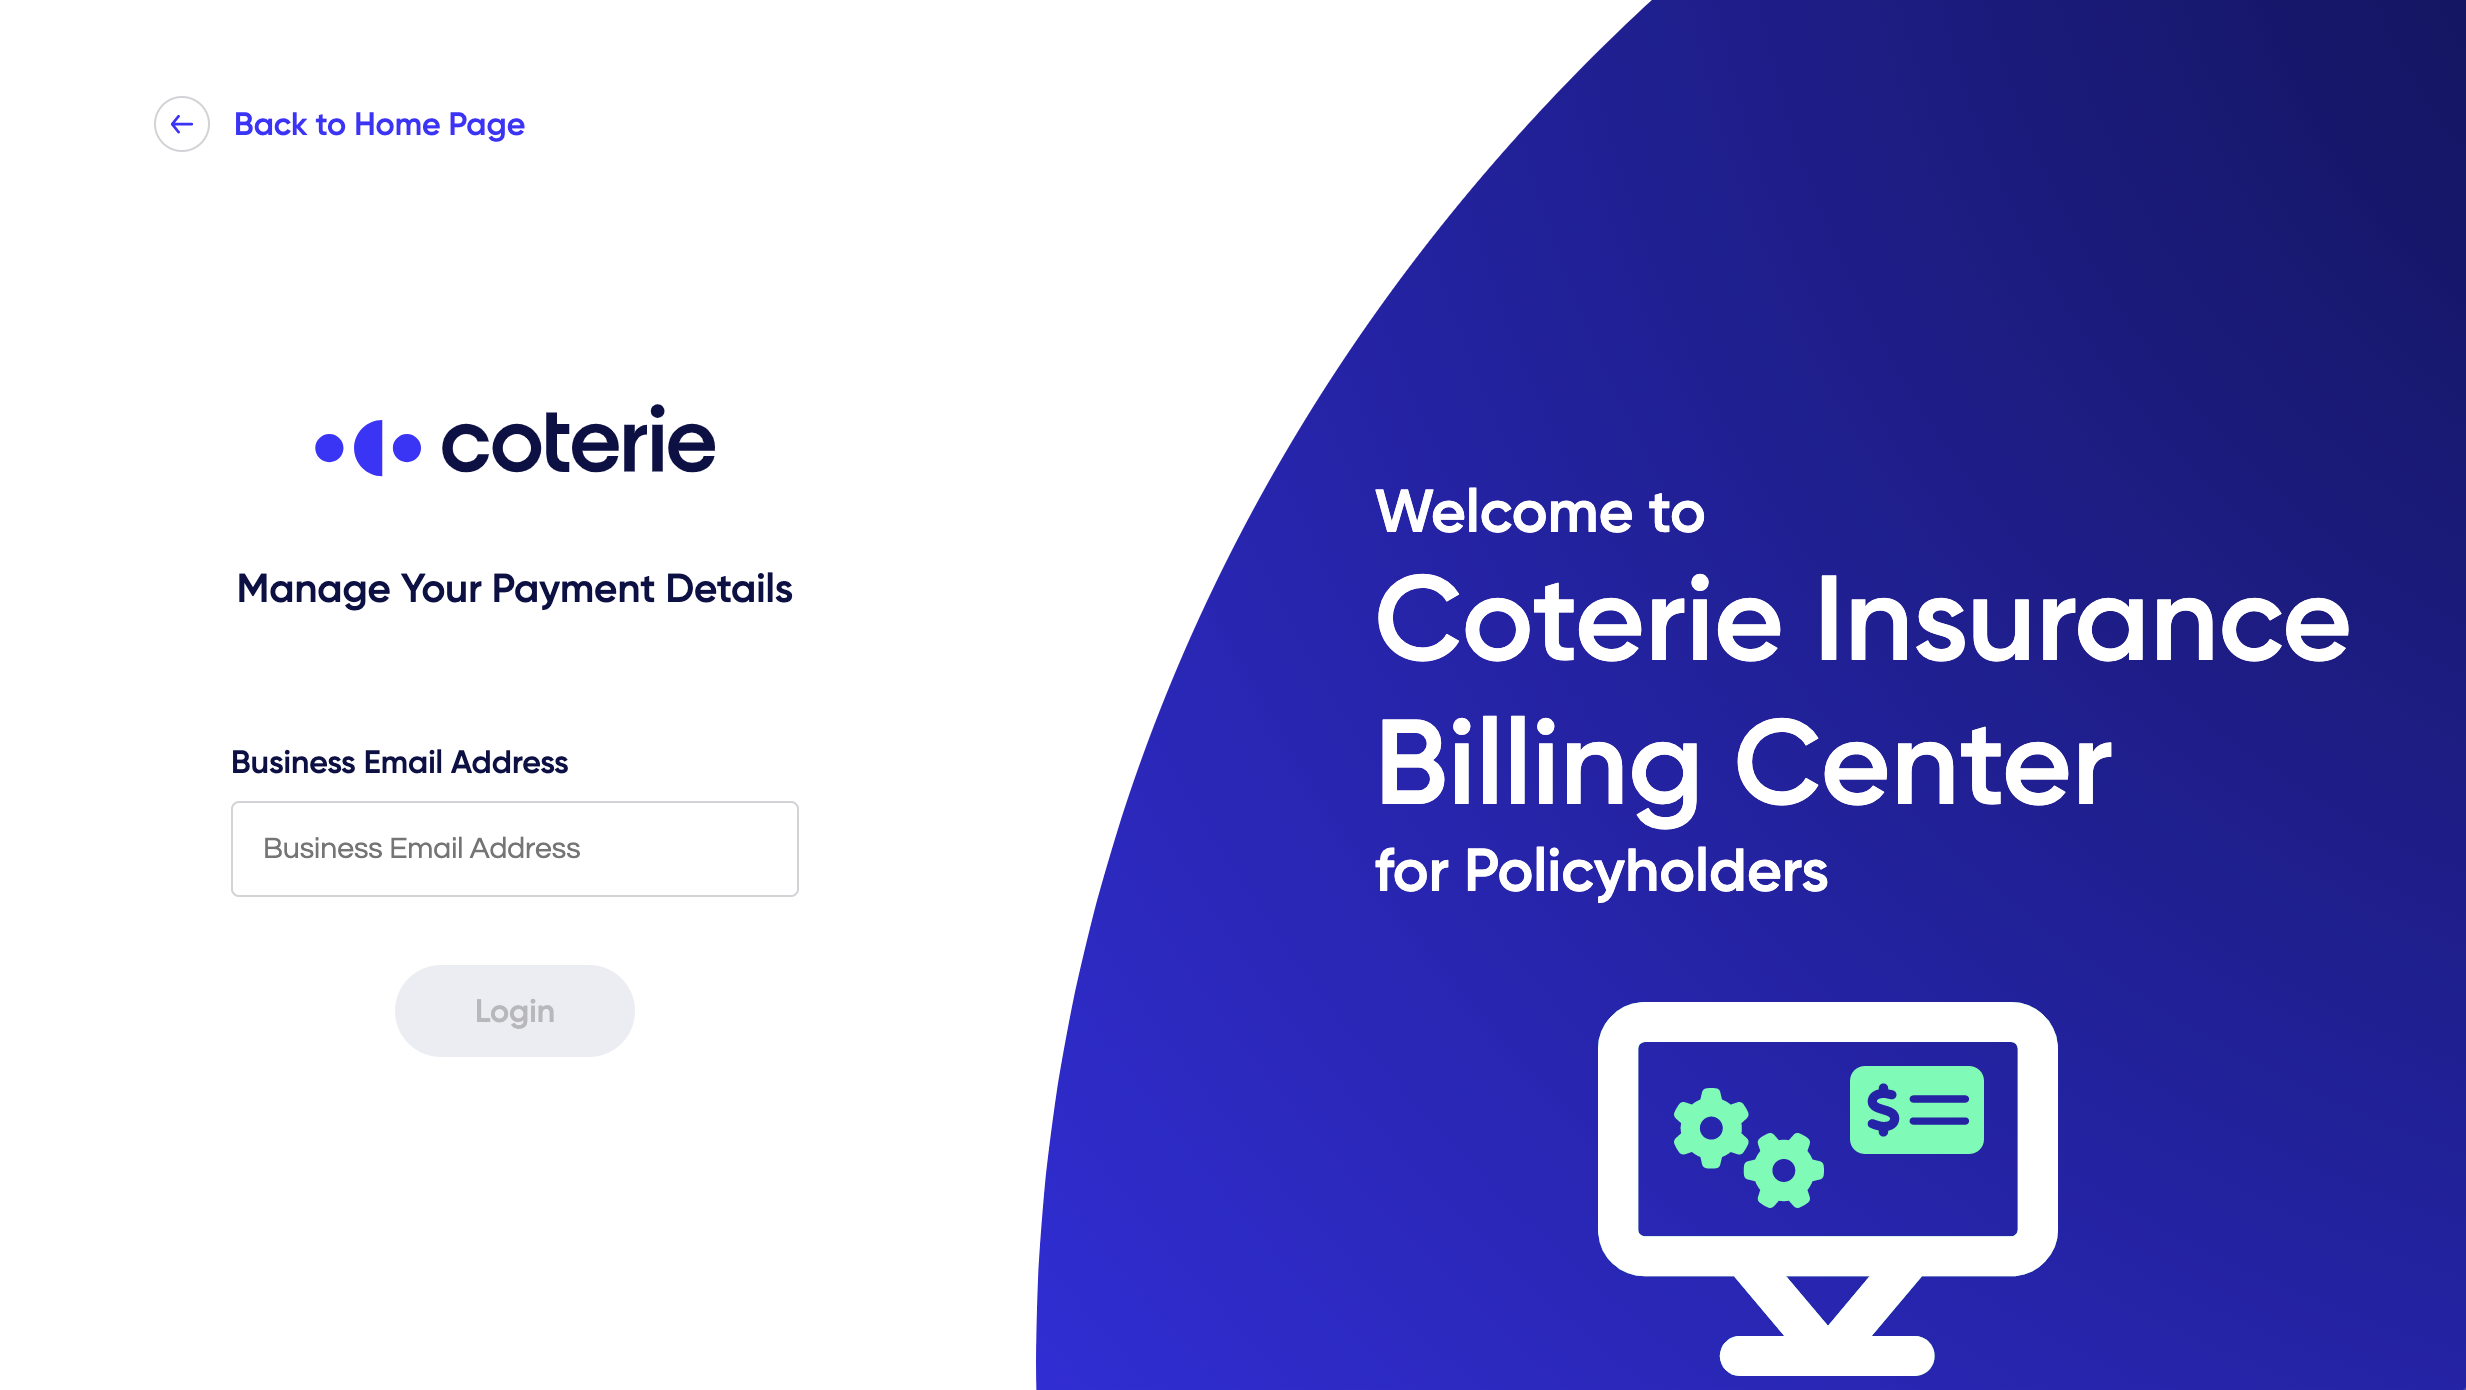 Coterie Insurance Billing Center for Policyholders